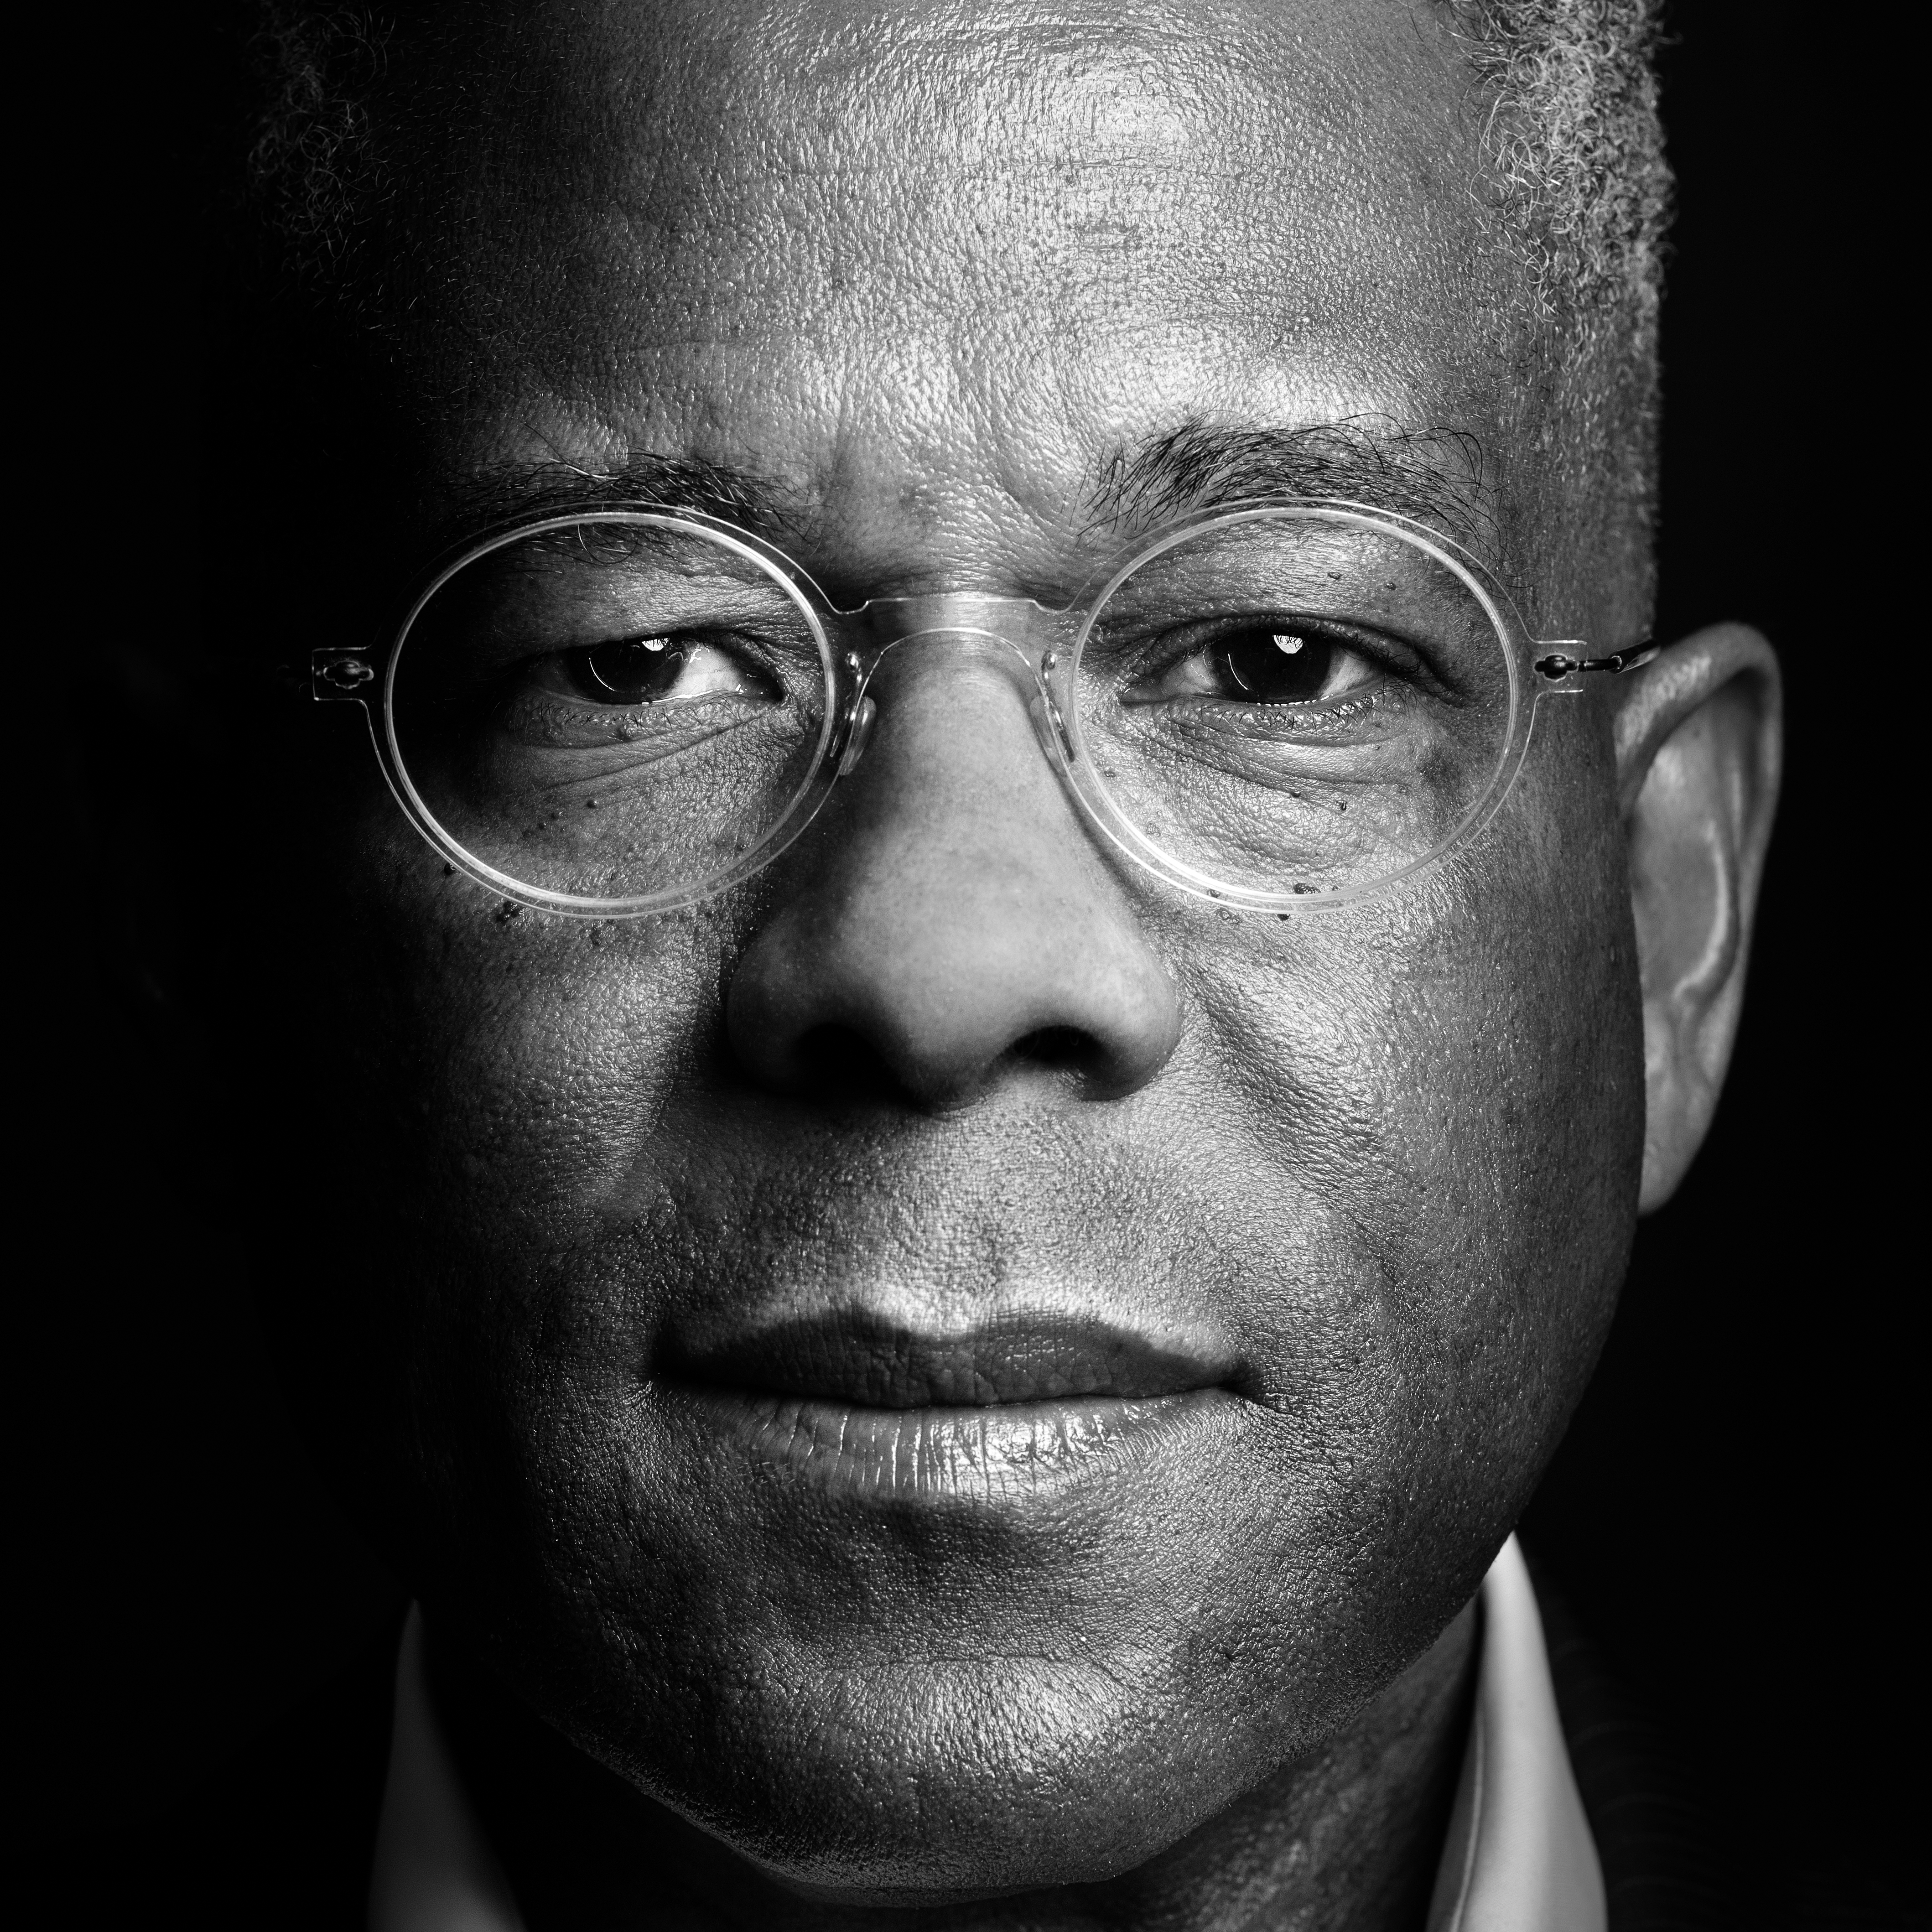 Allen West, Republican candidate for Texas governor